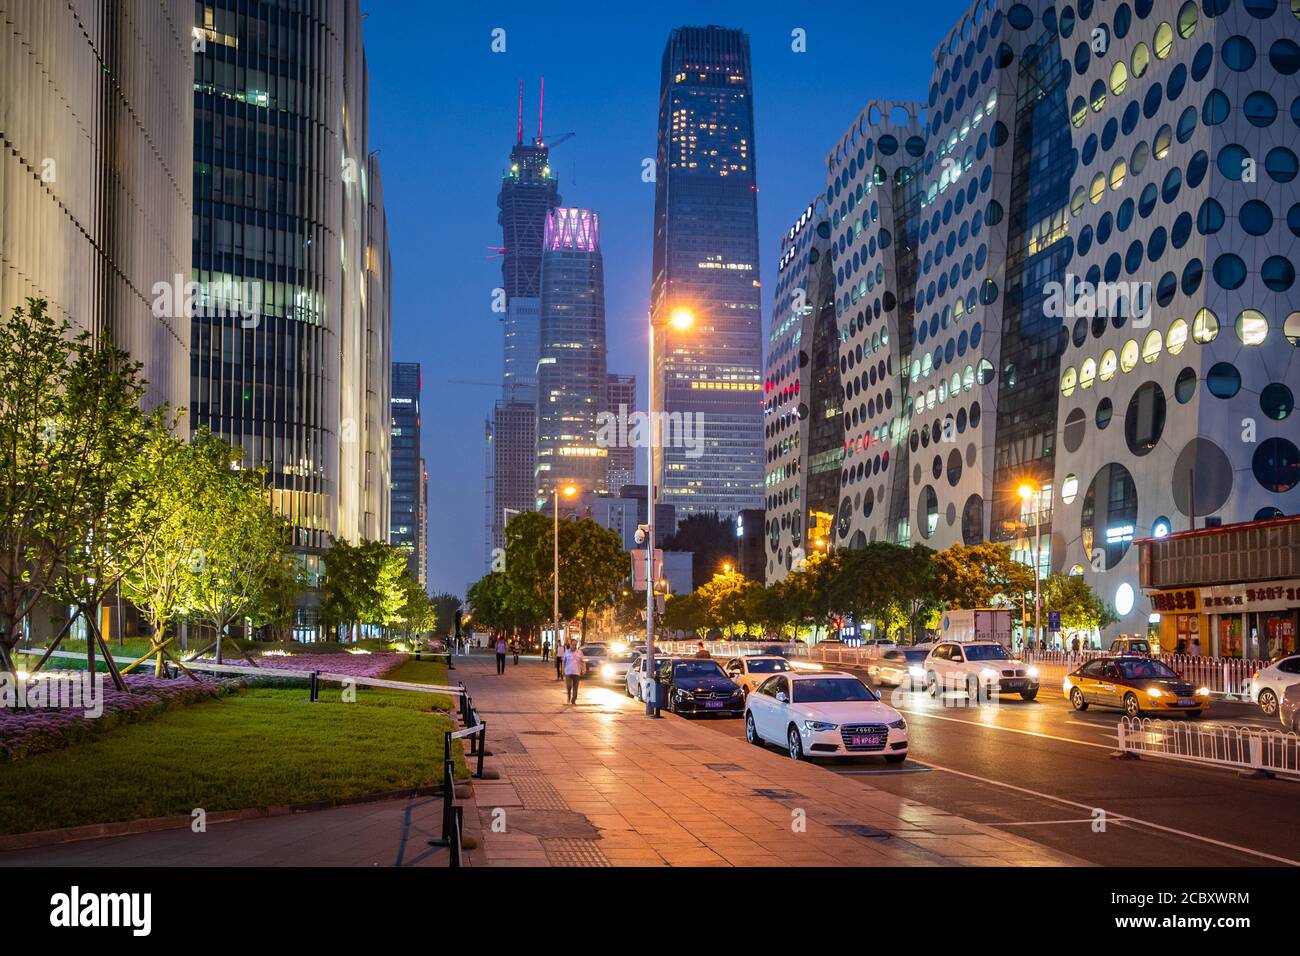 Street view of Beijing, China, showing traffic, pedestrians and modern office buildings at night in the Beijing Central Business District. Stock Photo